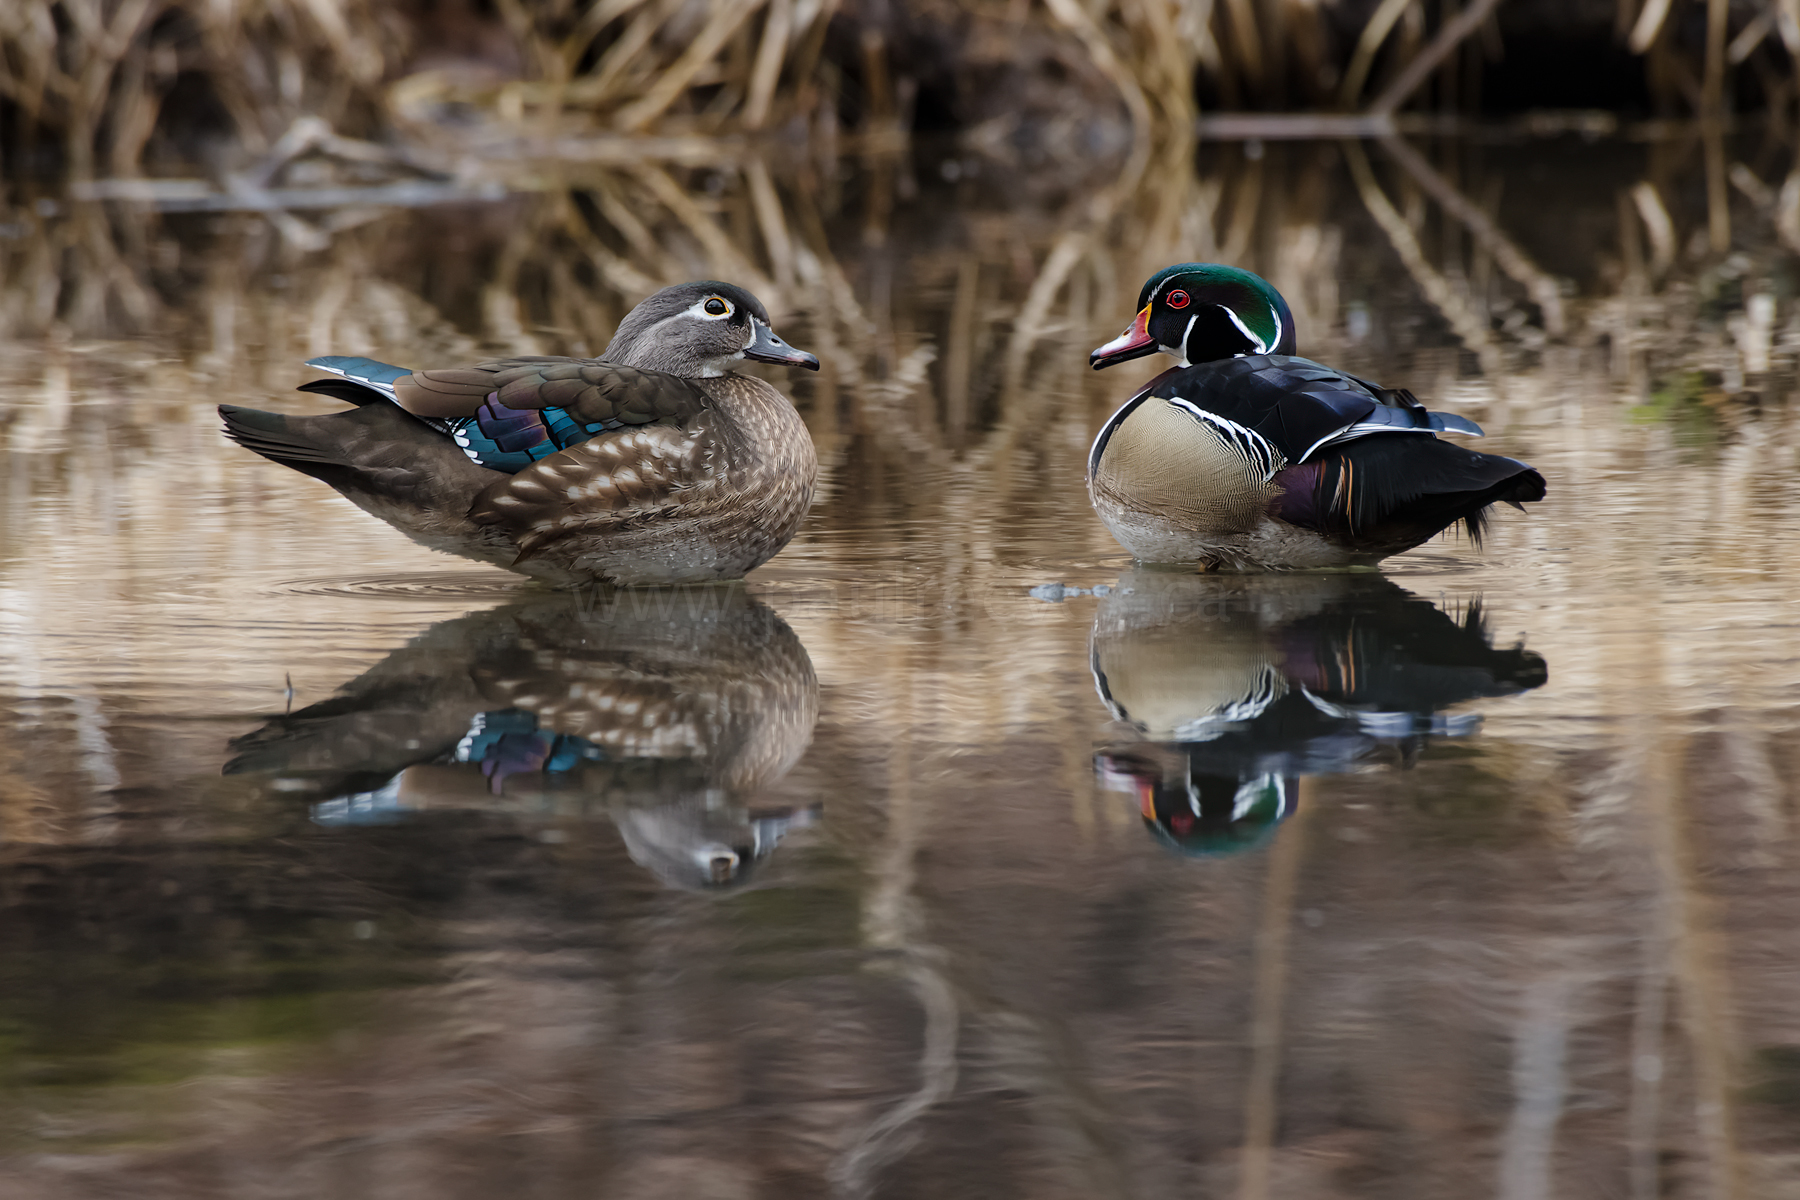 A pair of wood ducks near water. The female has less colorful feathers and a distinctive white tear-drop shape around her eye. The male has brilliant, high-contrasting colors, including blue, green, chestnut, and white.